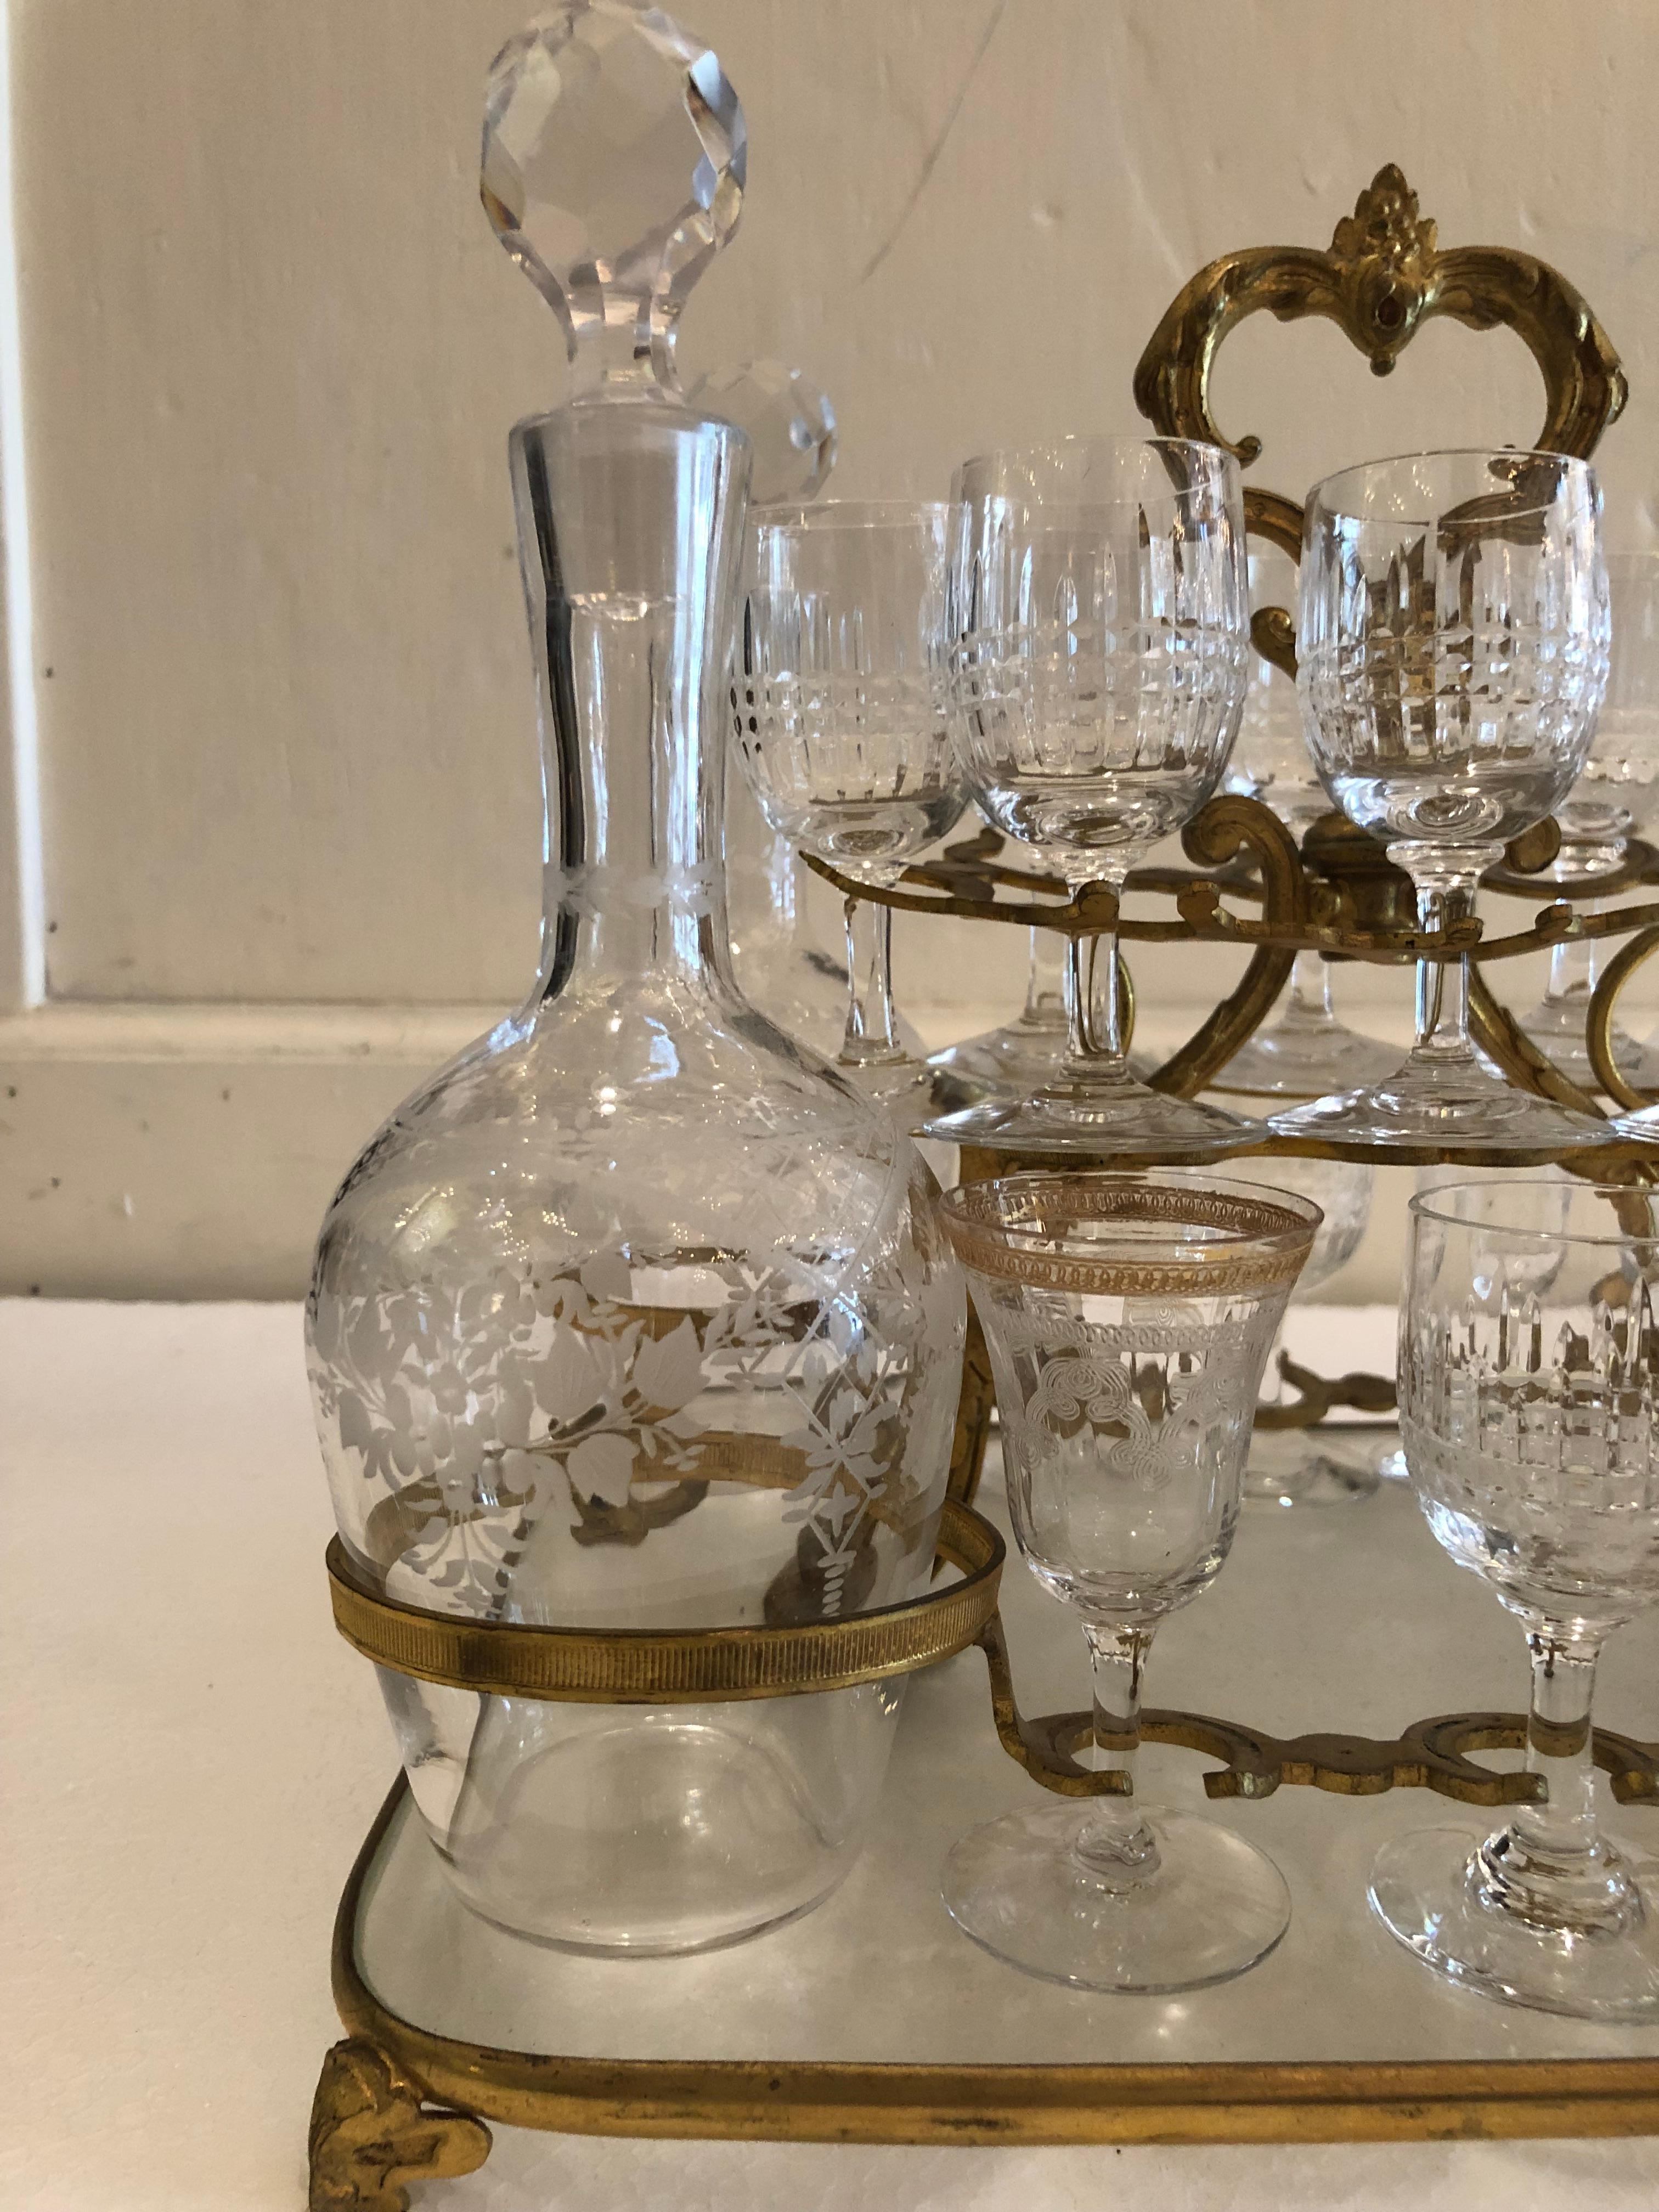 Tantalus set with Baccarat glasses- A gilt bronze and glass tantalus stand with 4 etched glass decanters, 14 cordial glasses (4 are etched with gold rims, 10 are signed Baccarat). Together with a three piece cut glass decanter set housed in a